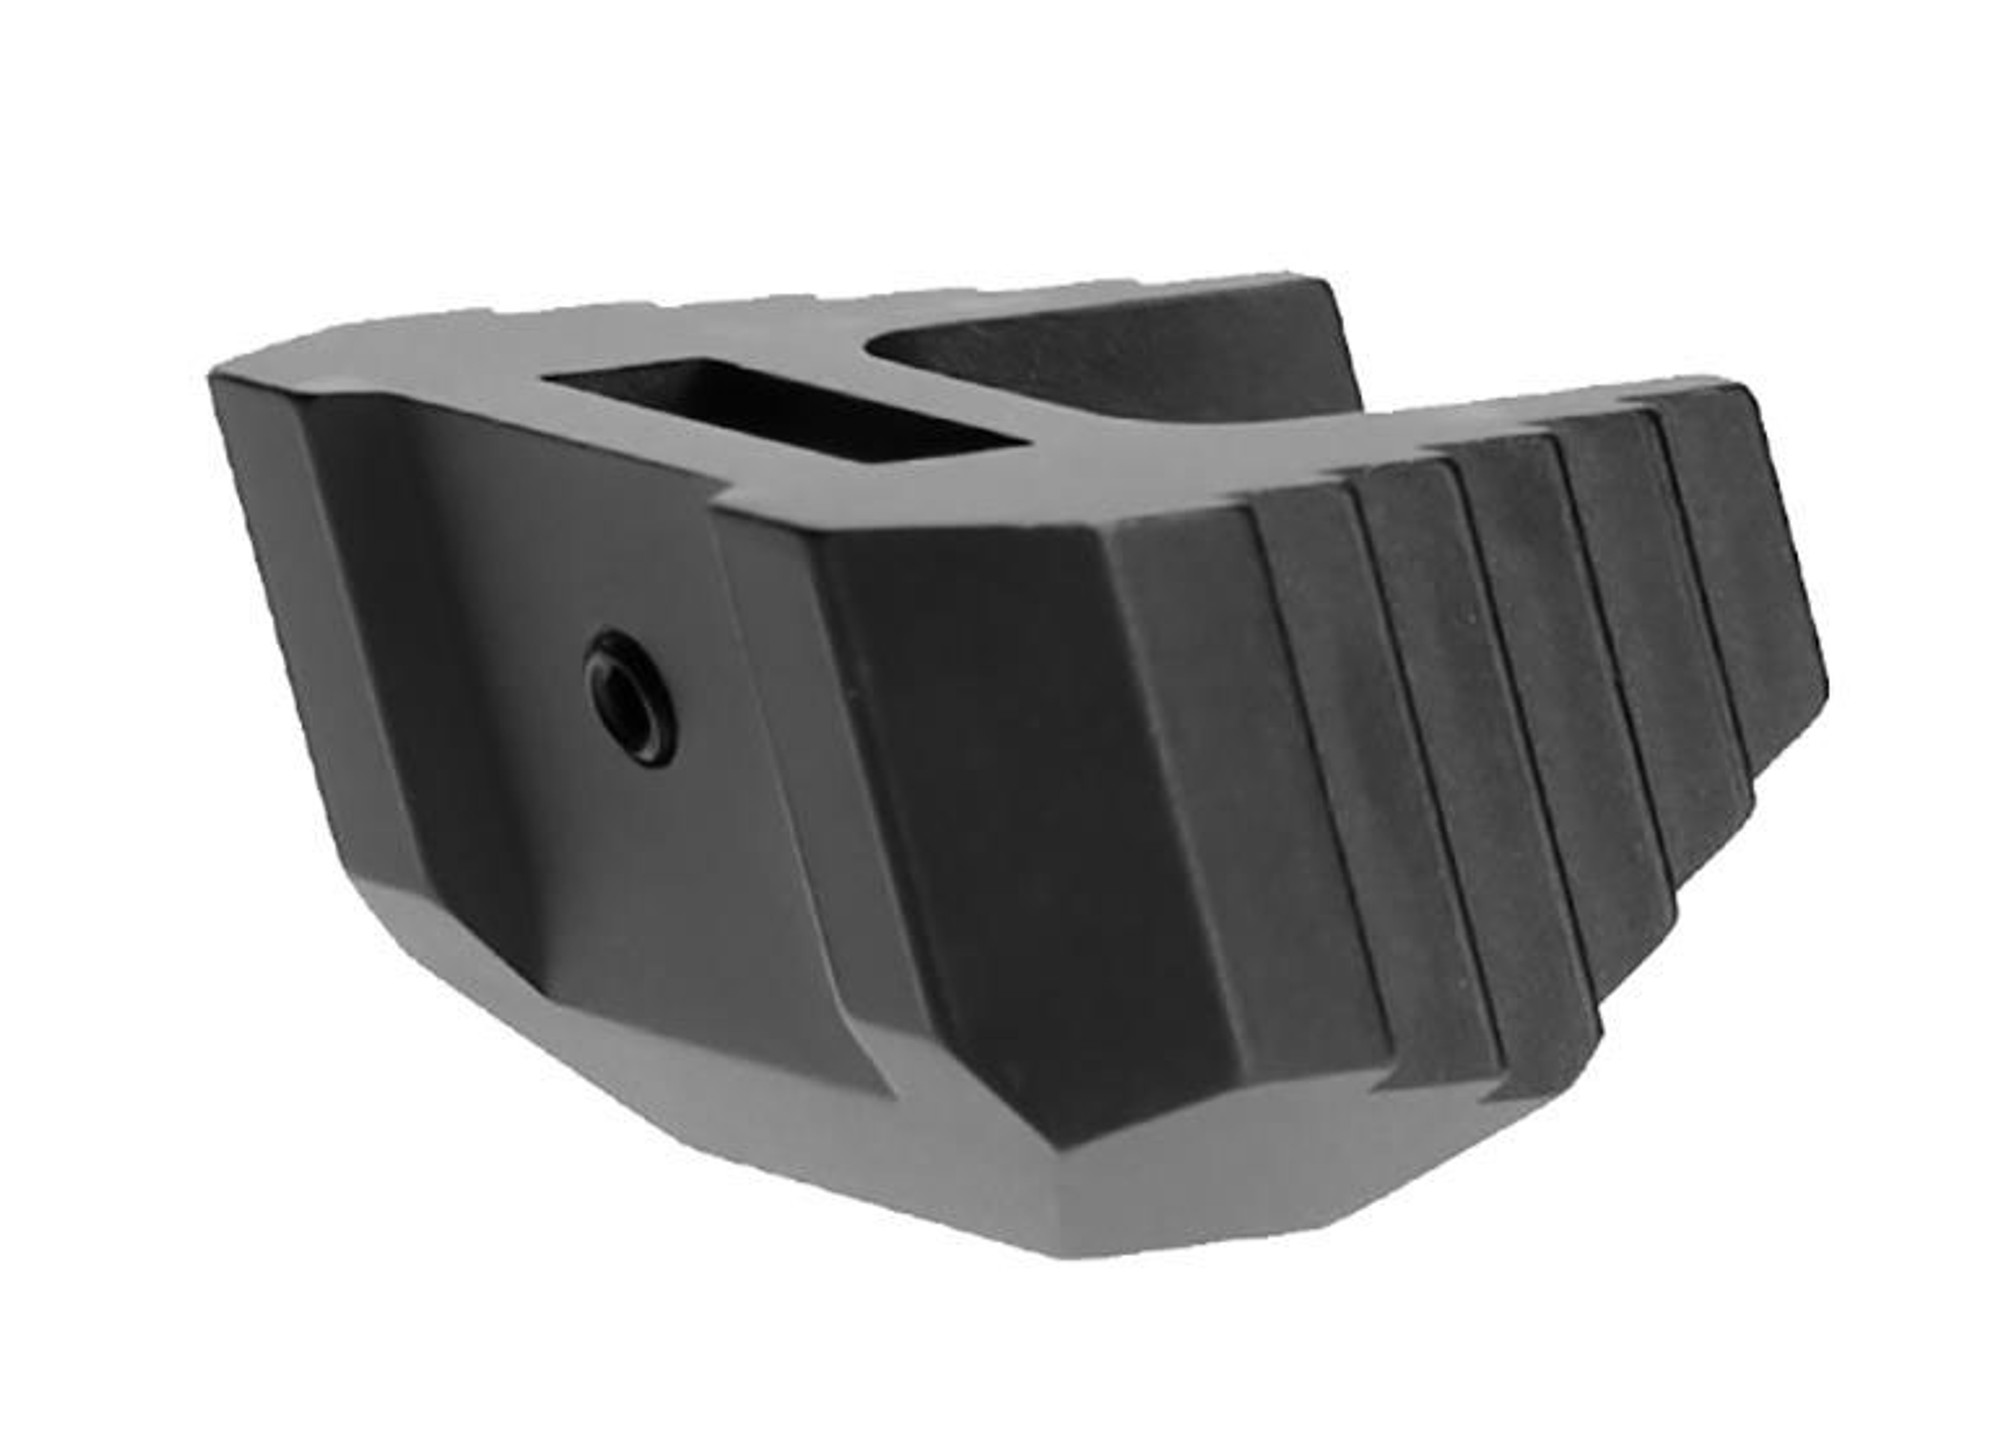 Laylax Quick Magazine Release for G&G ARP9 AEG